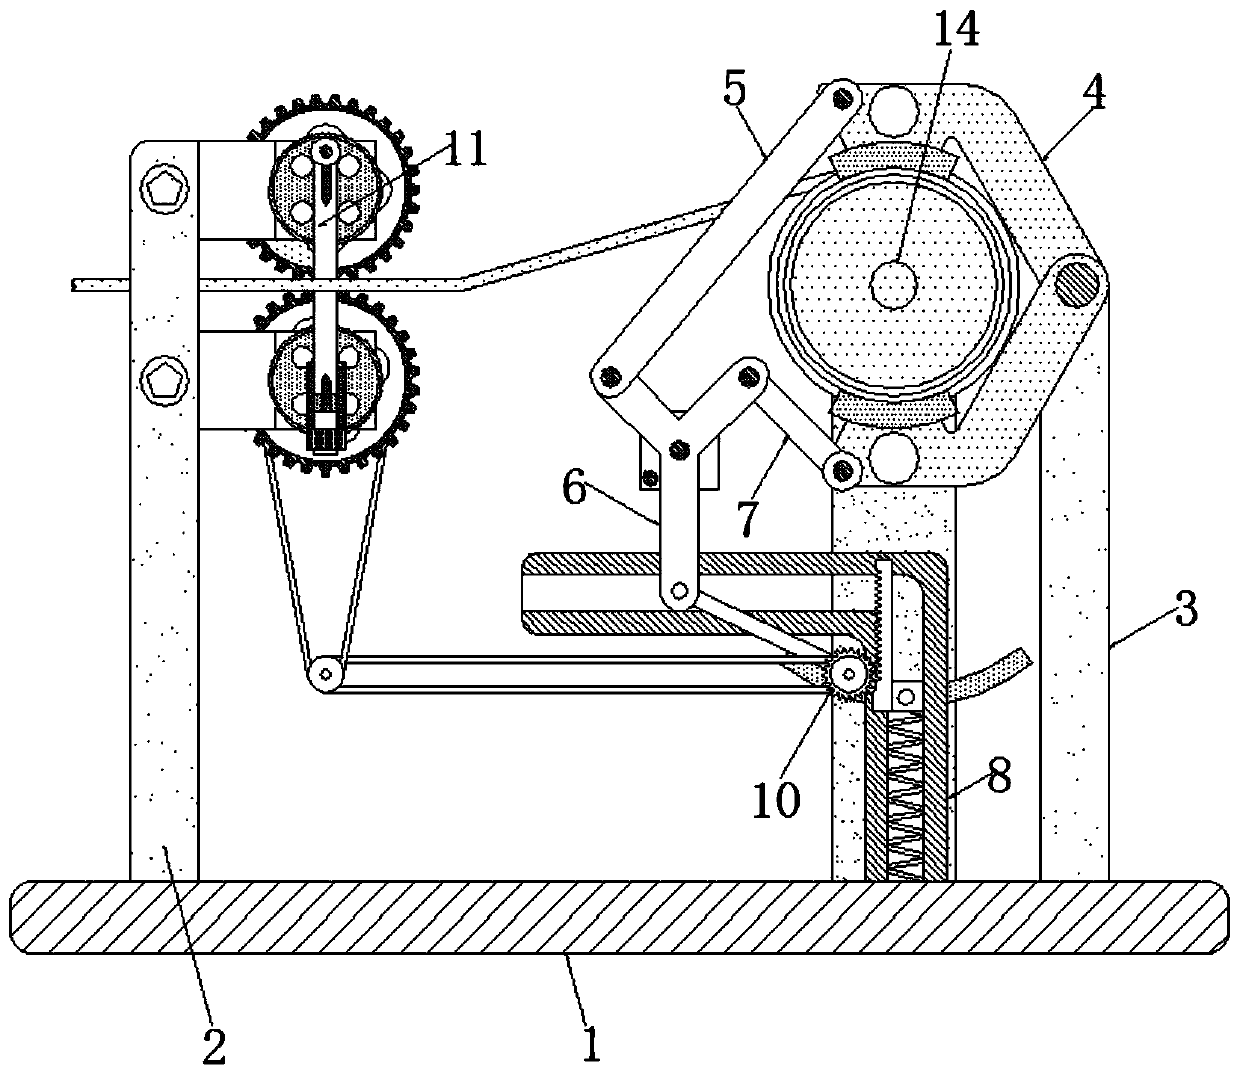 Cable winding device for quantitative cable winding and automatic cutting based on movement of toothed bar